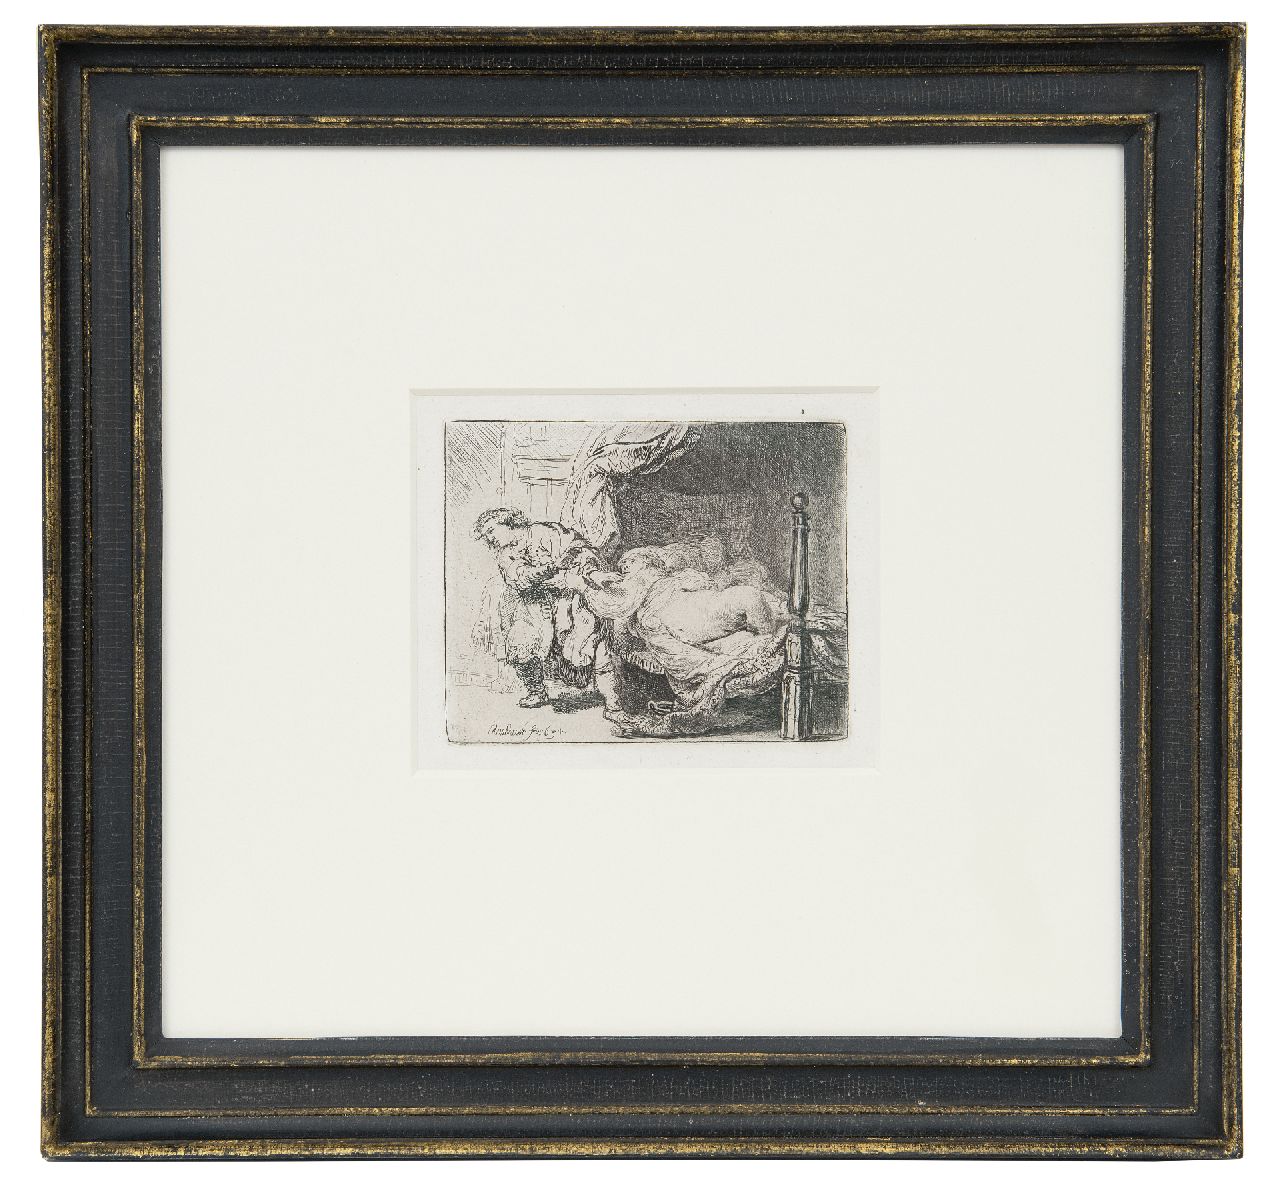 Rembrandt (Rembrandt Harmensz. van Rijn)   | Rembrandt (Rembrandt Harmensz. van Rijn) | Prints and Multiples offered for sale | Josef and Potifar's wife, etching on paper 9.0 x 11.5 cm, signed l.l. on the plate and dated on the plate 1634